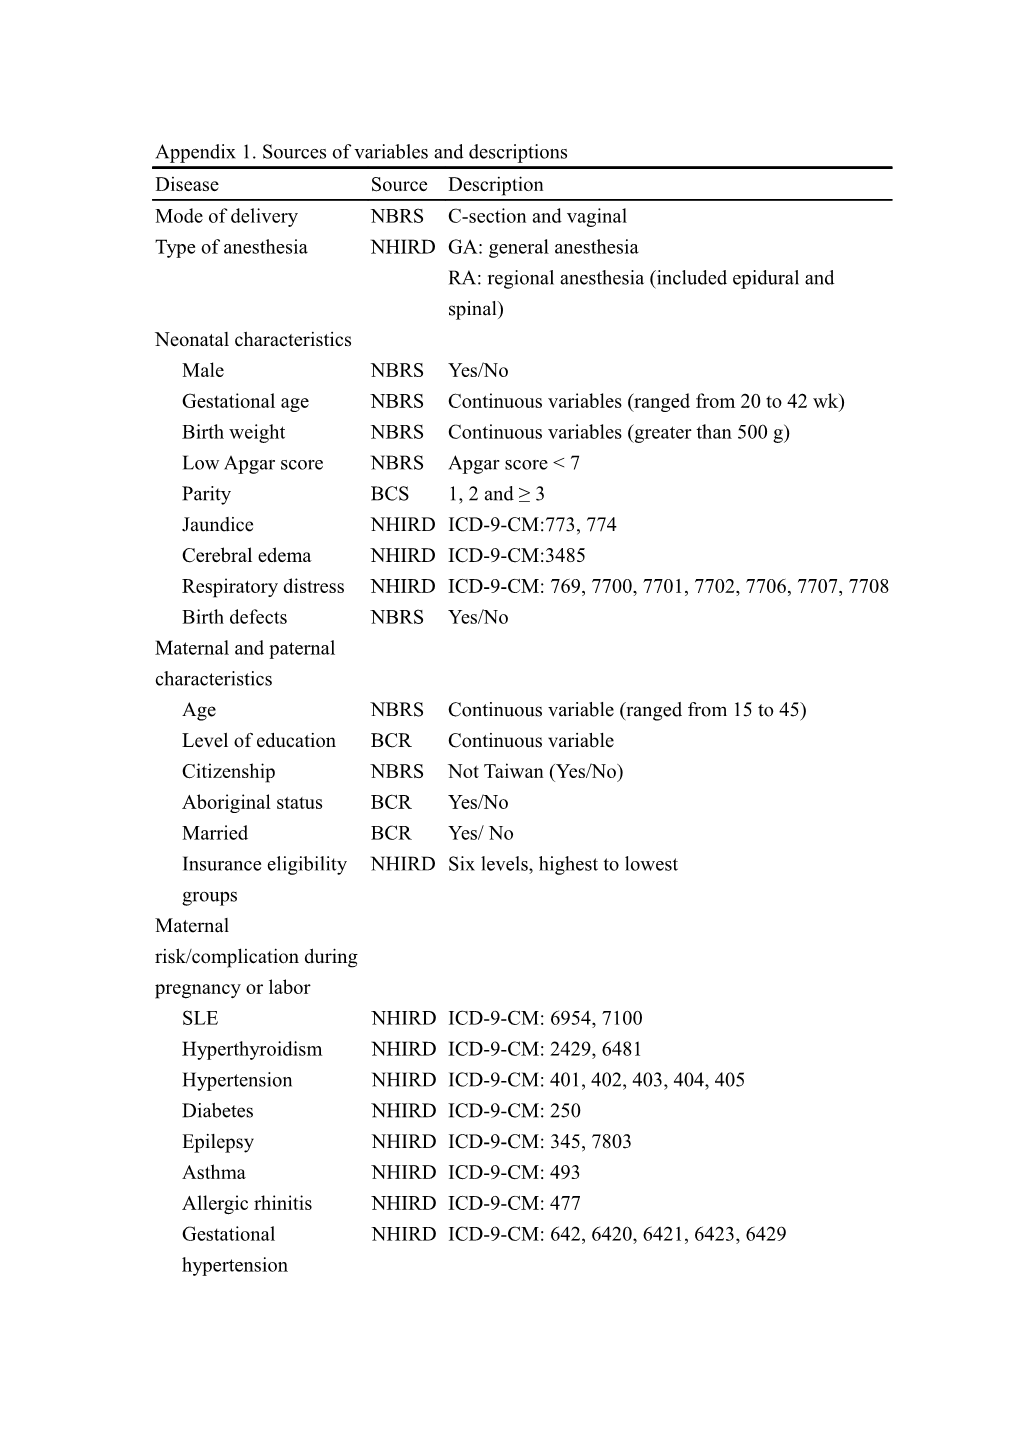 Appendix 4. Characteristics of C-Section Births Delivered with RA and GA Based on PS-Matched